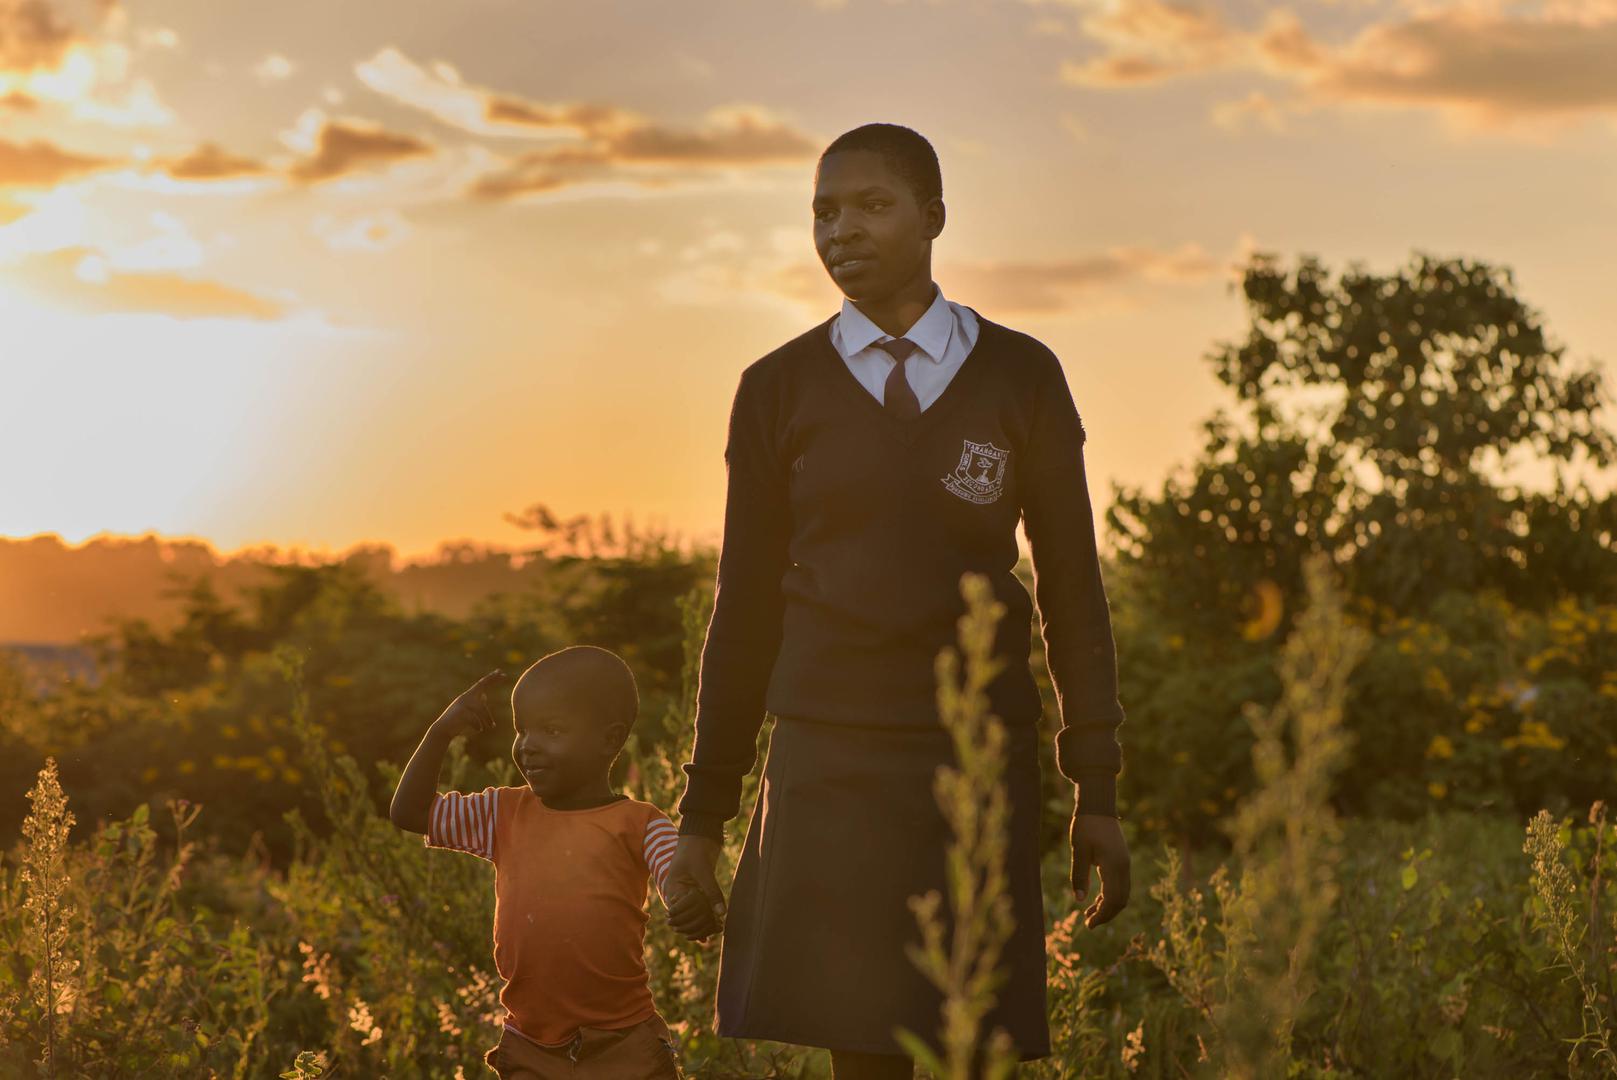 Pregnant Students in Africa Need Your Support, Not Rejection